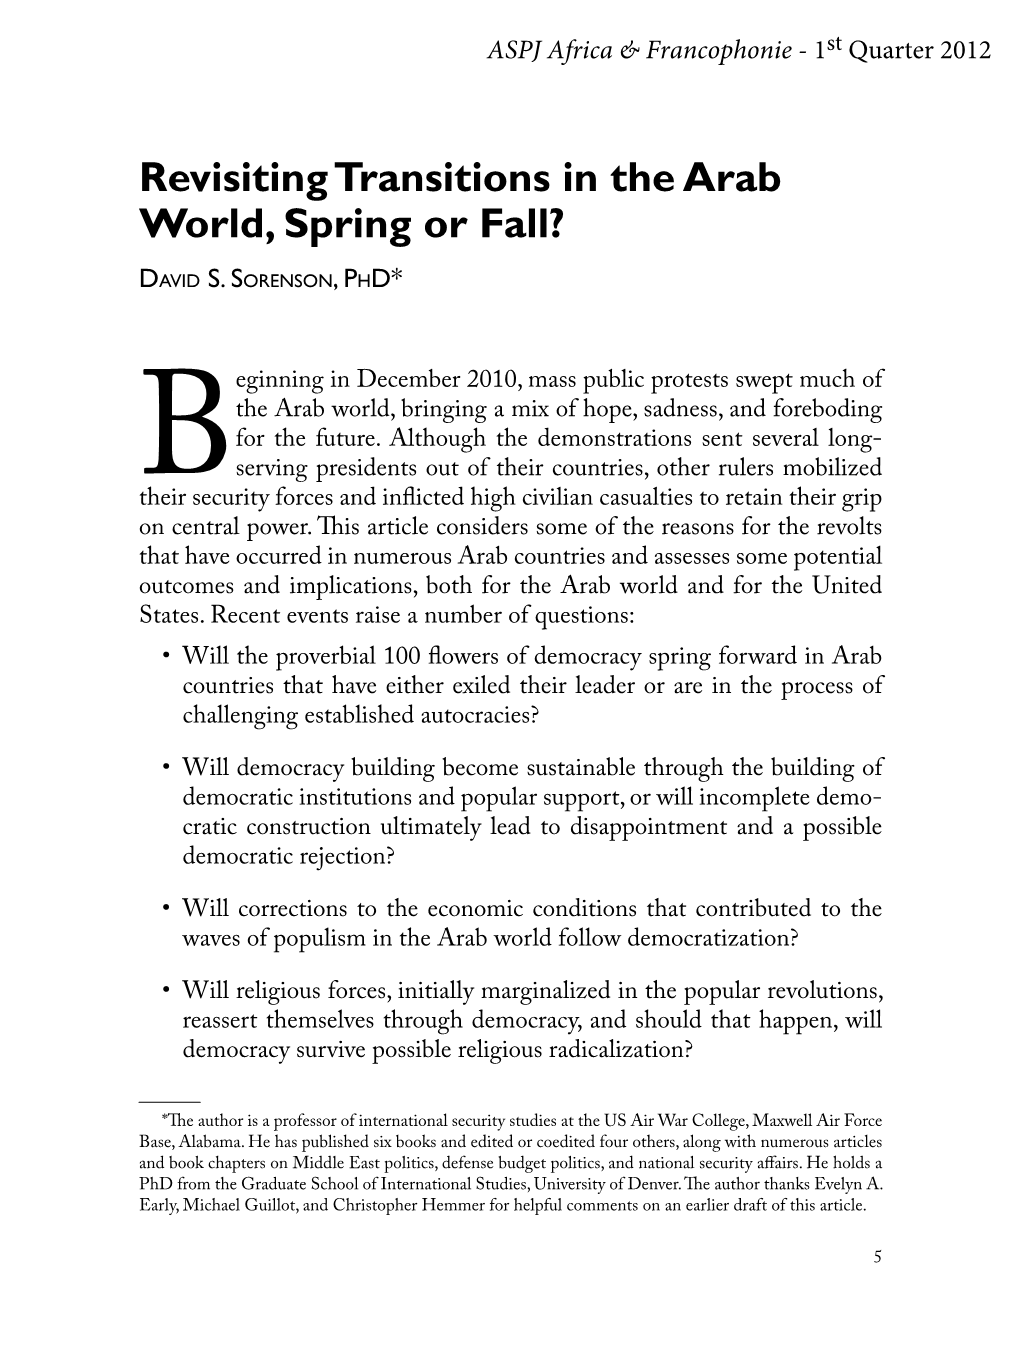 Revisiting Transitions in the Arab World, Spring Or Fall?